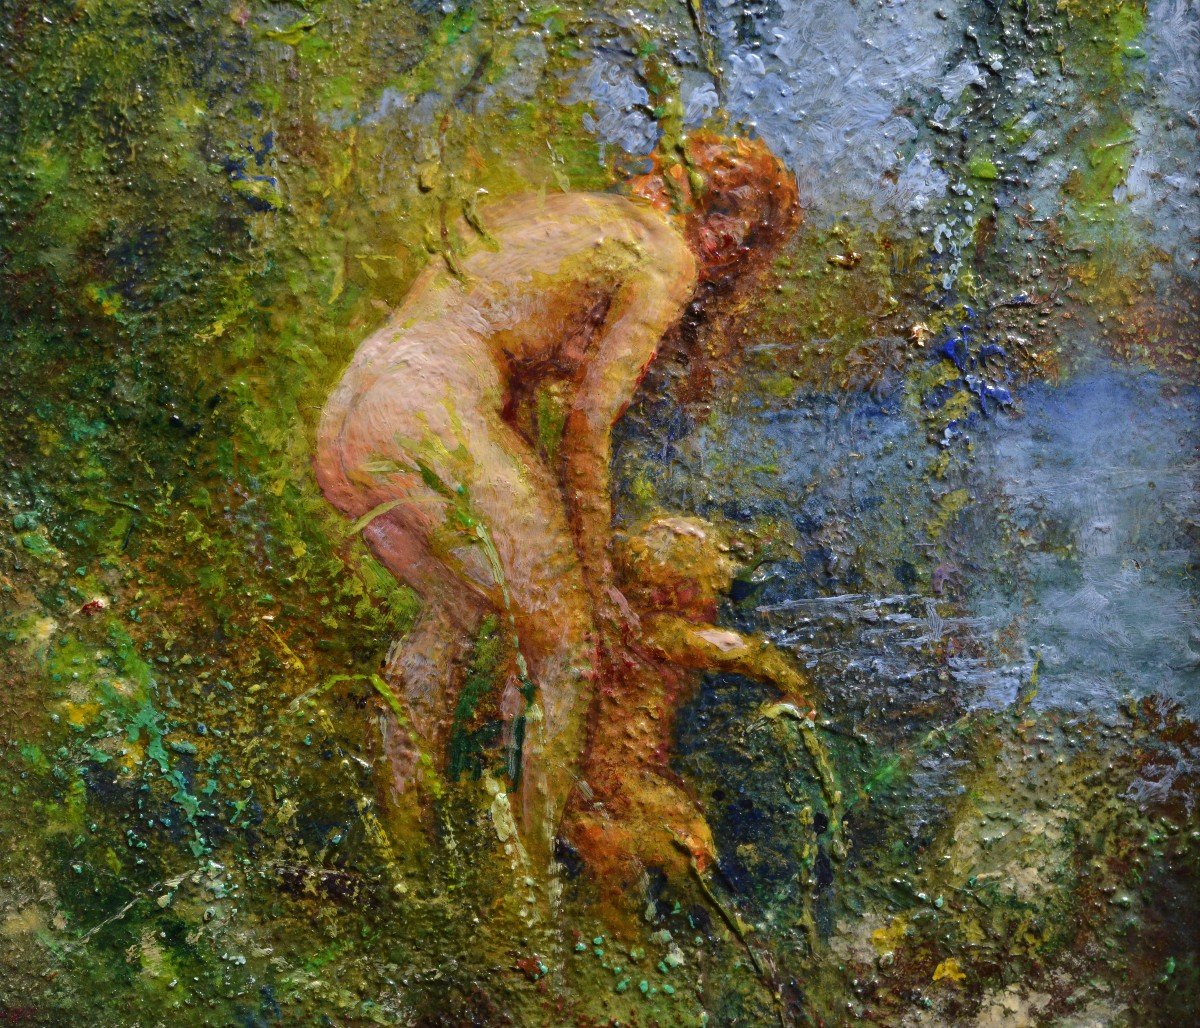 Woman Bathes Child In River Ca 1932 Oil Painting By Swedish Master Widholm-photo-3